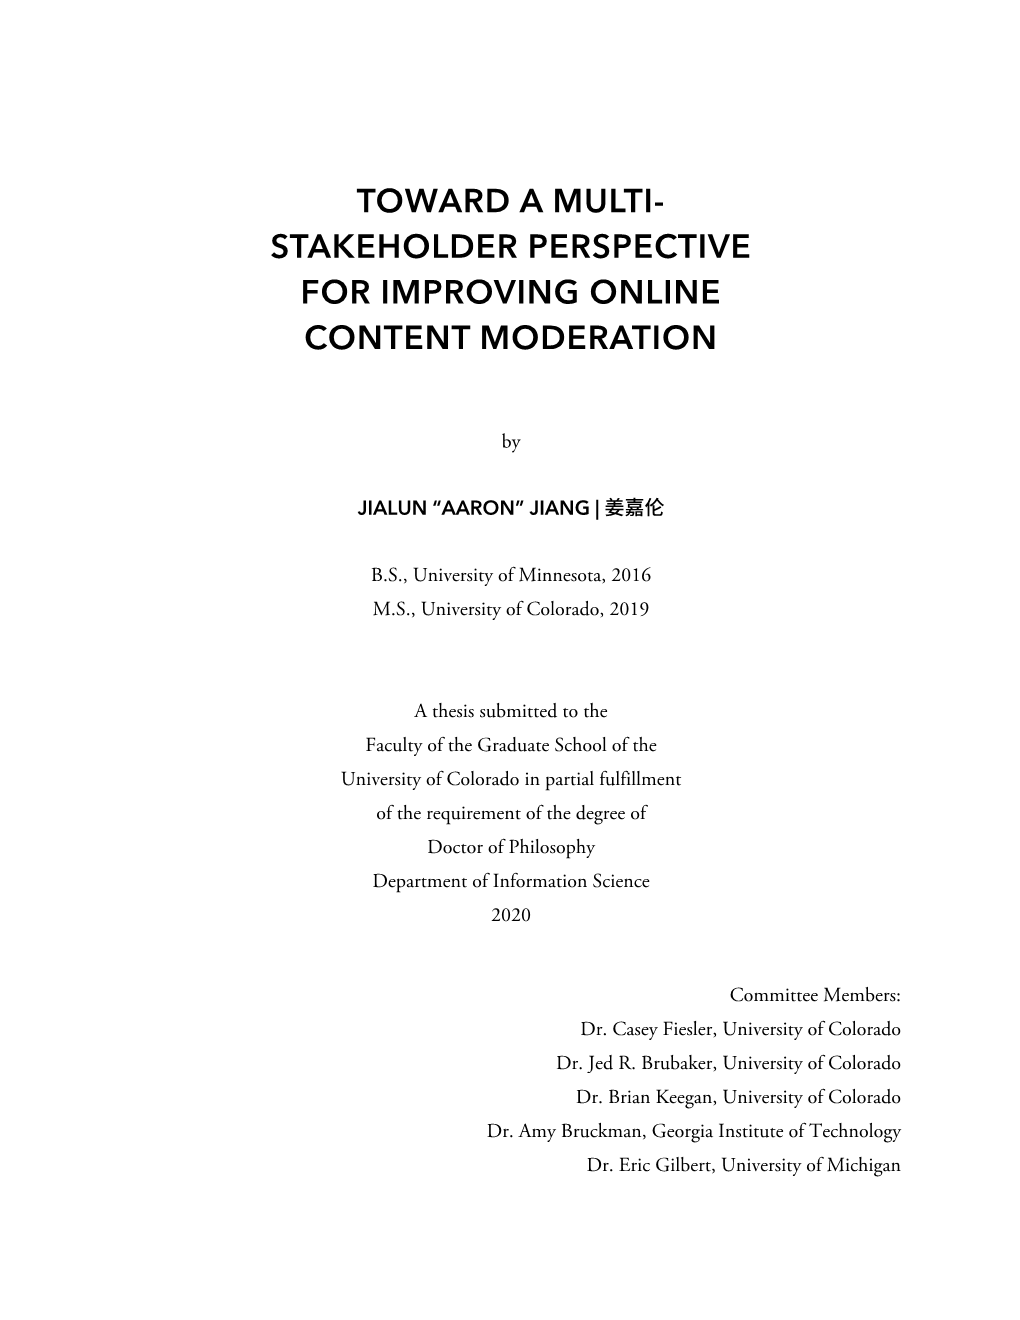 Stakeholder Perspective for Improving Online Content Moderation